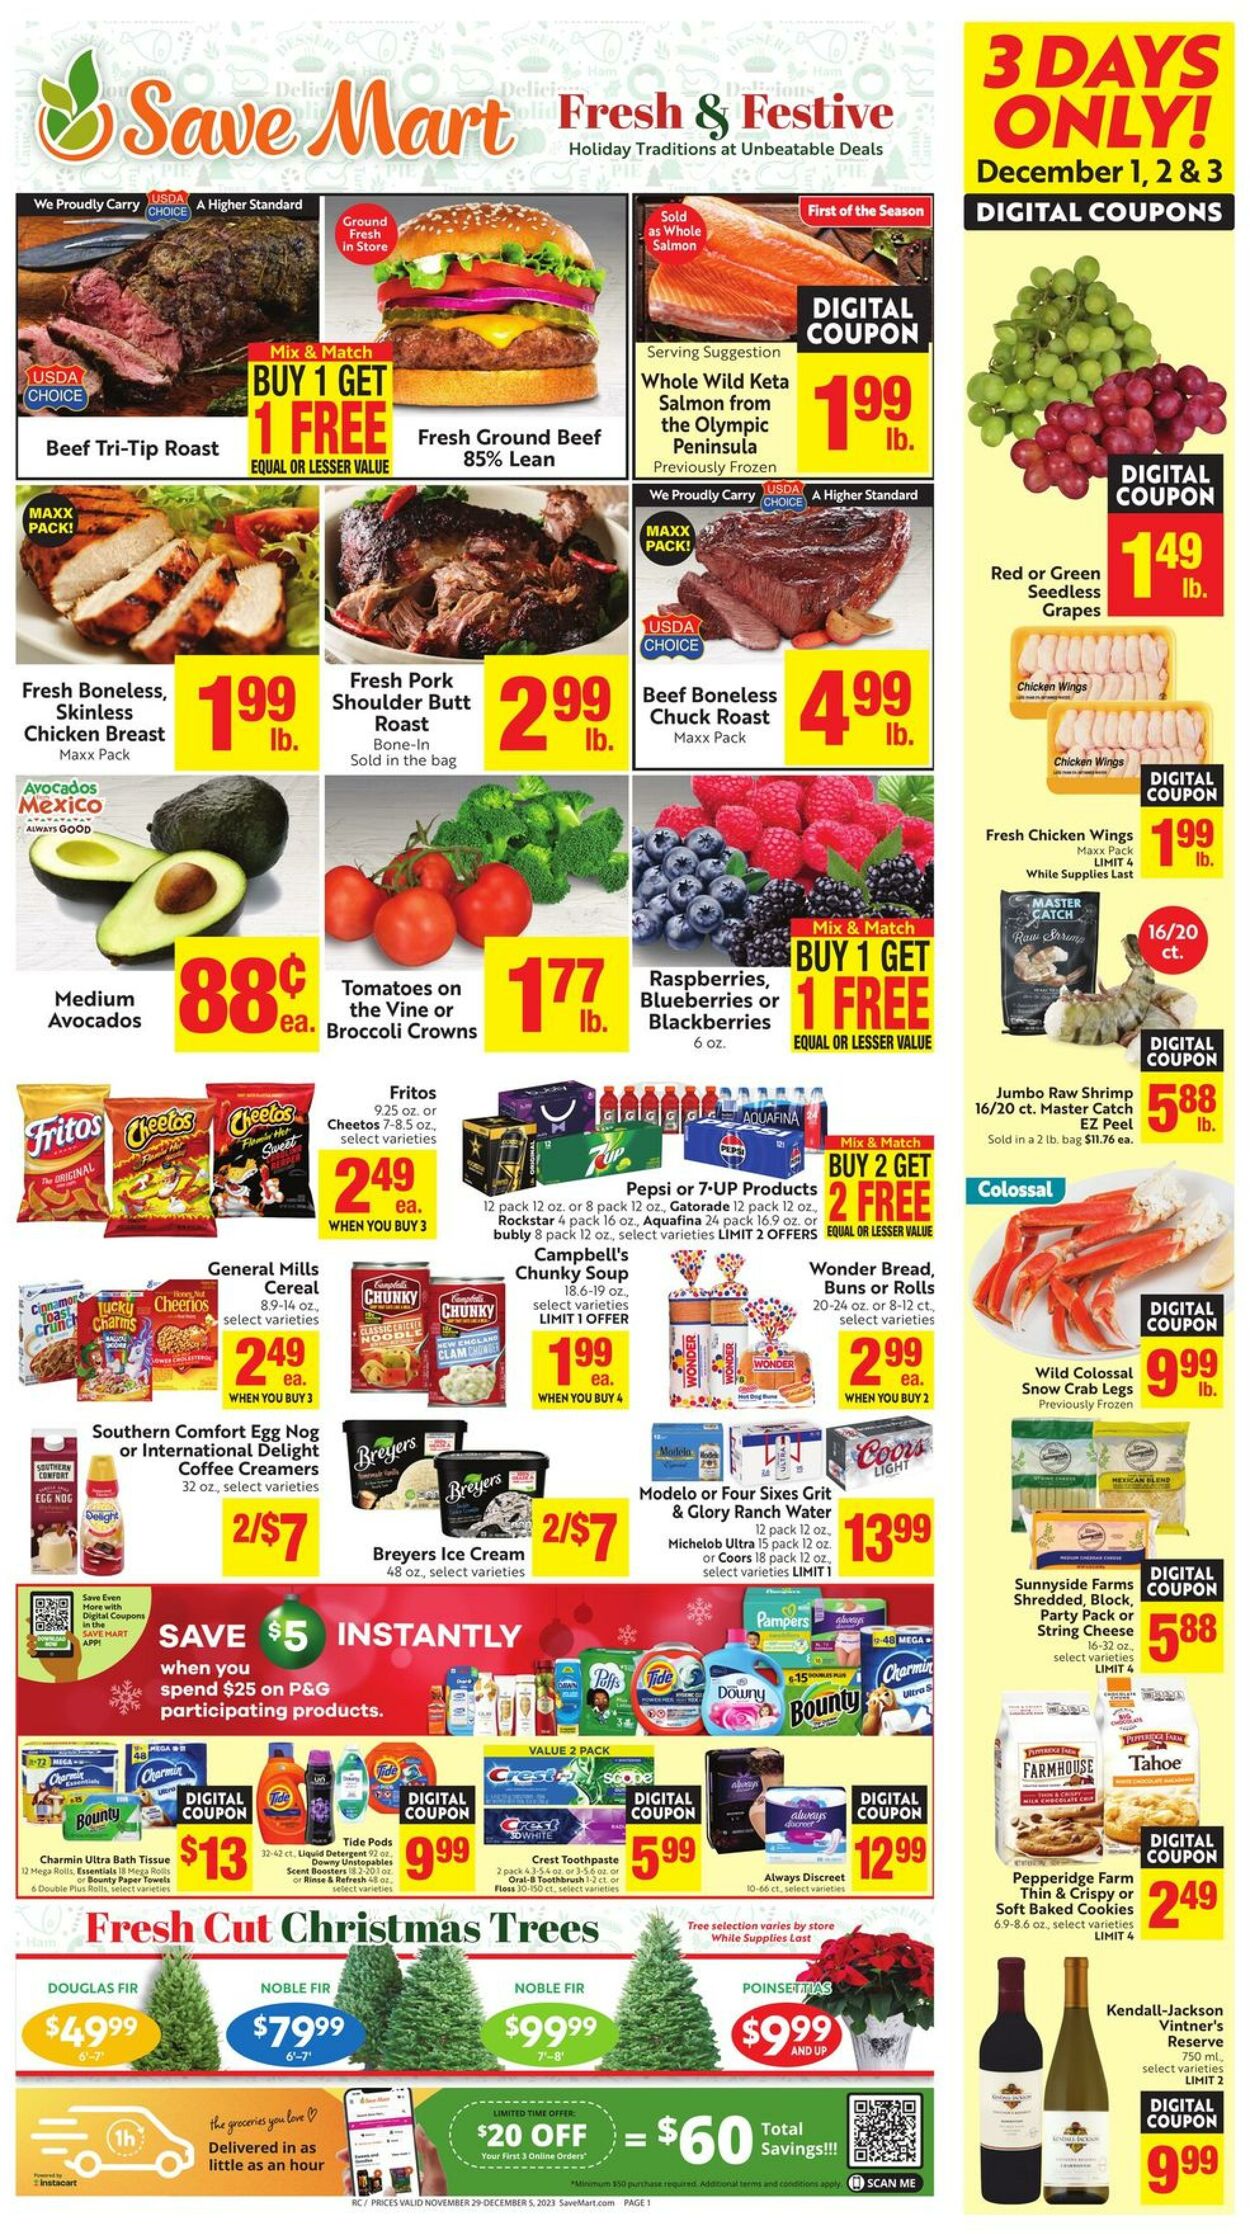 Save Mart Promotional weekly ads